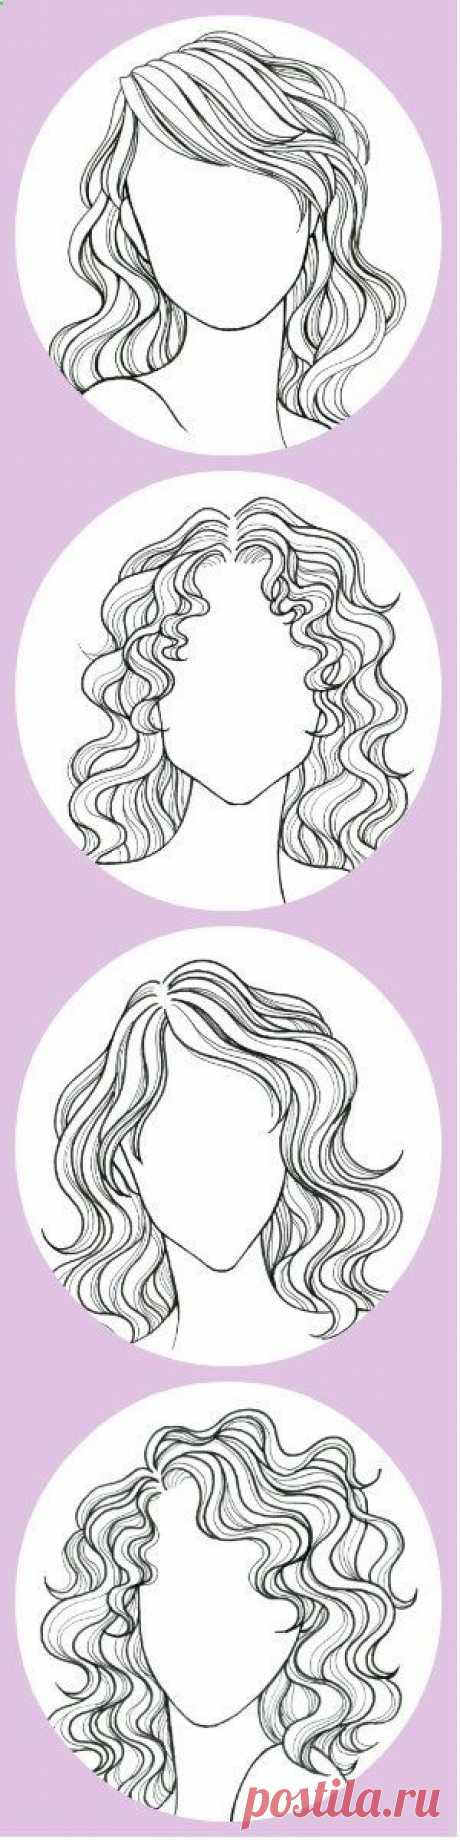 The Fail-Safe, Un-Screw-Up-Able, Take-This-to-The Salon Guide to Your Perfect Haircut || Your best look depends on your hair texture and your face shape. Pin this, if you have wavy or curly hair. (Double-click for exactly what to say to your stylist) - campinglivez The Fail-Safe, Un-Screw-Up-Able, Take-This-to-The Salon Guide to Your Perfect Haircut || Your best look depends...